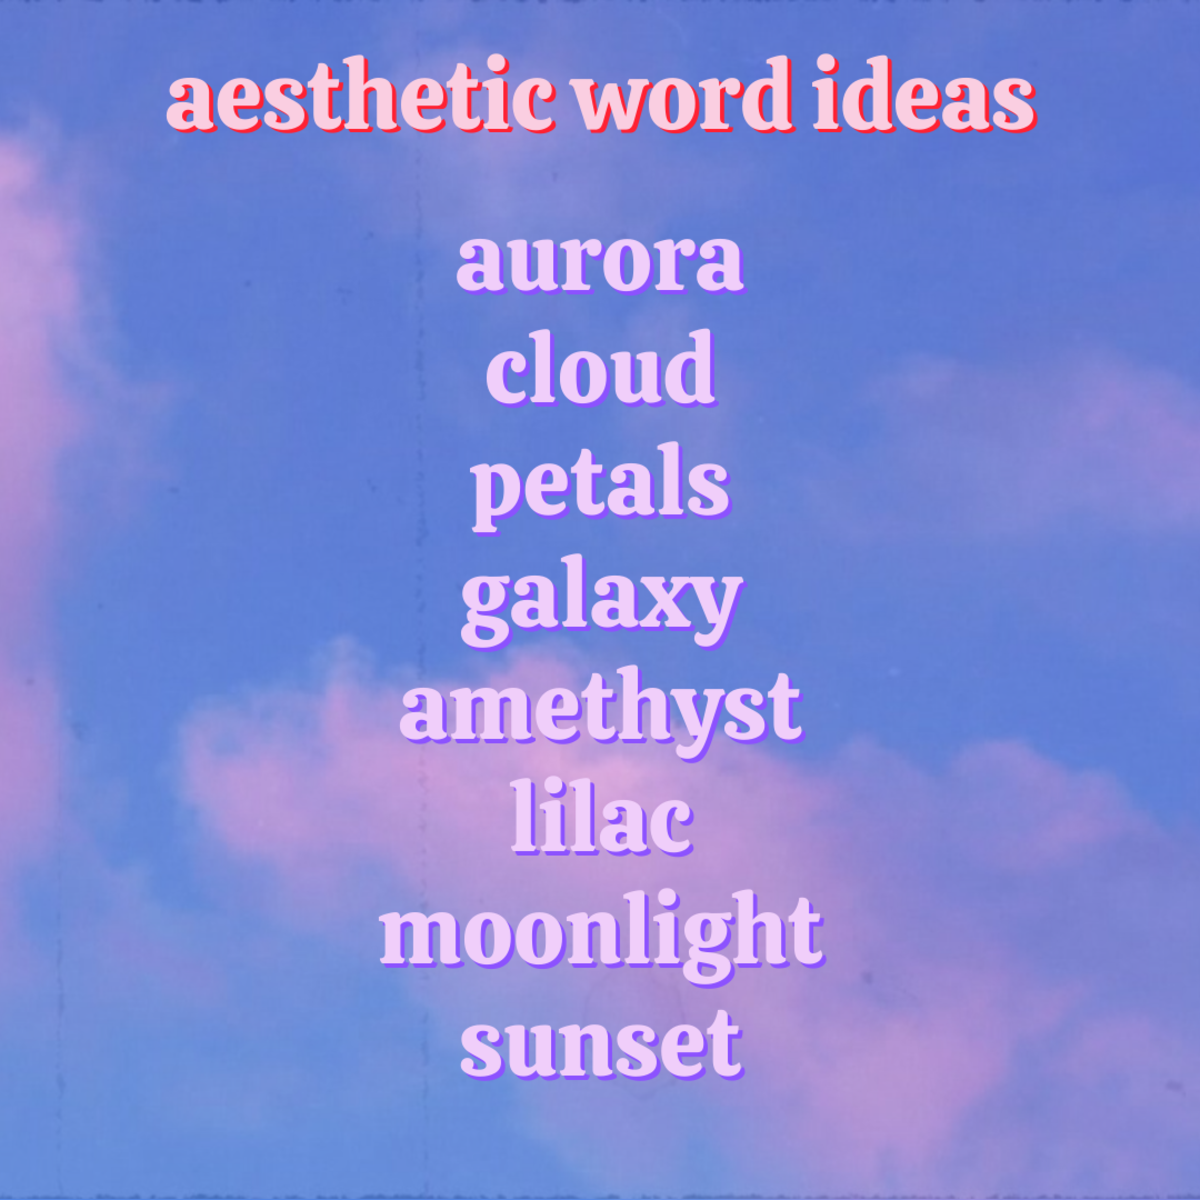 Here are some more aesthetic word ideas to inspire you!